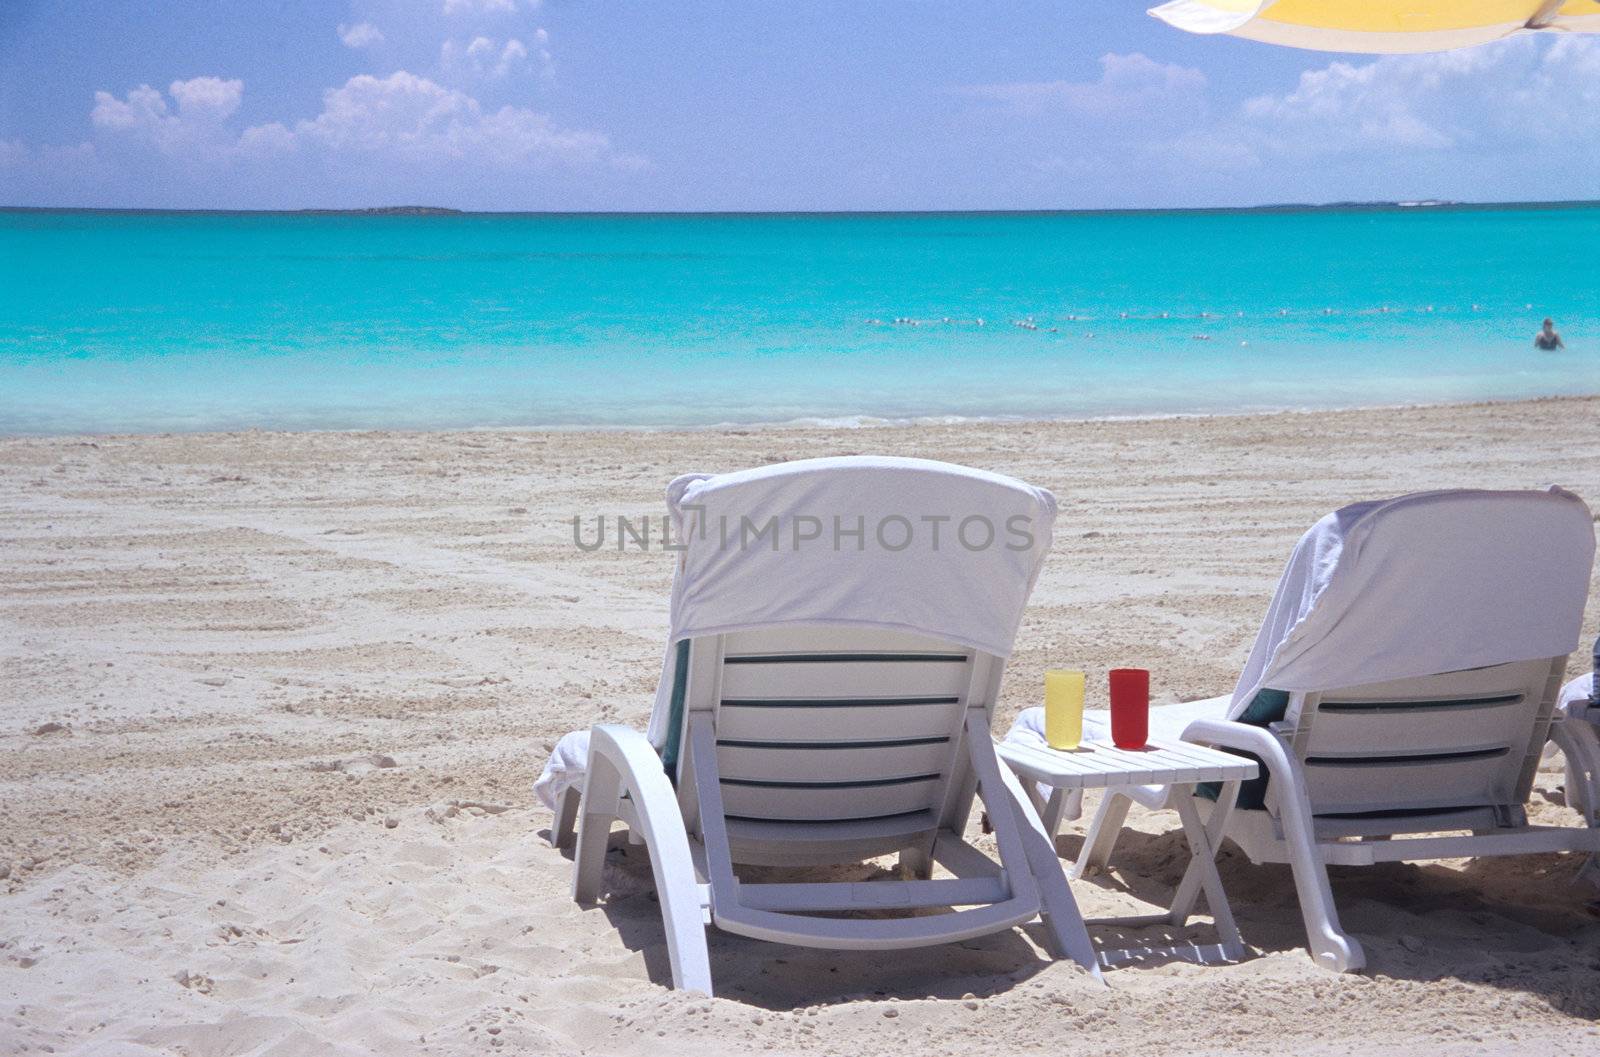 Empty deck chairs wait on a white sandy beach facing the turquoise waters of the Bahamas.